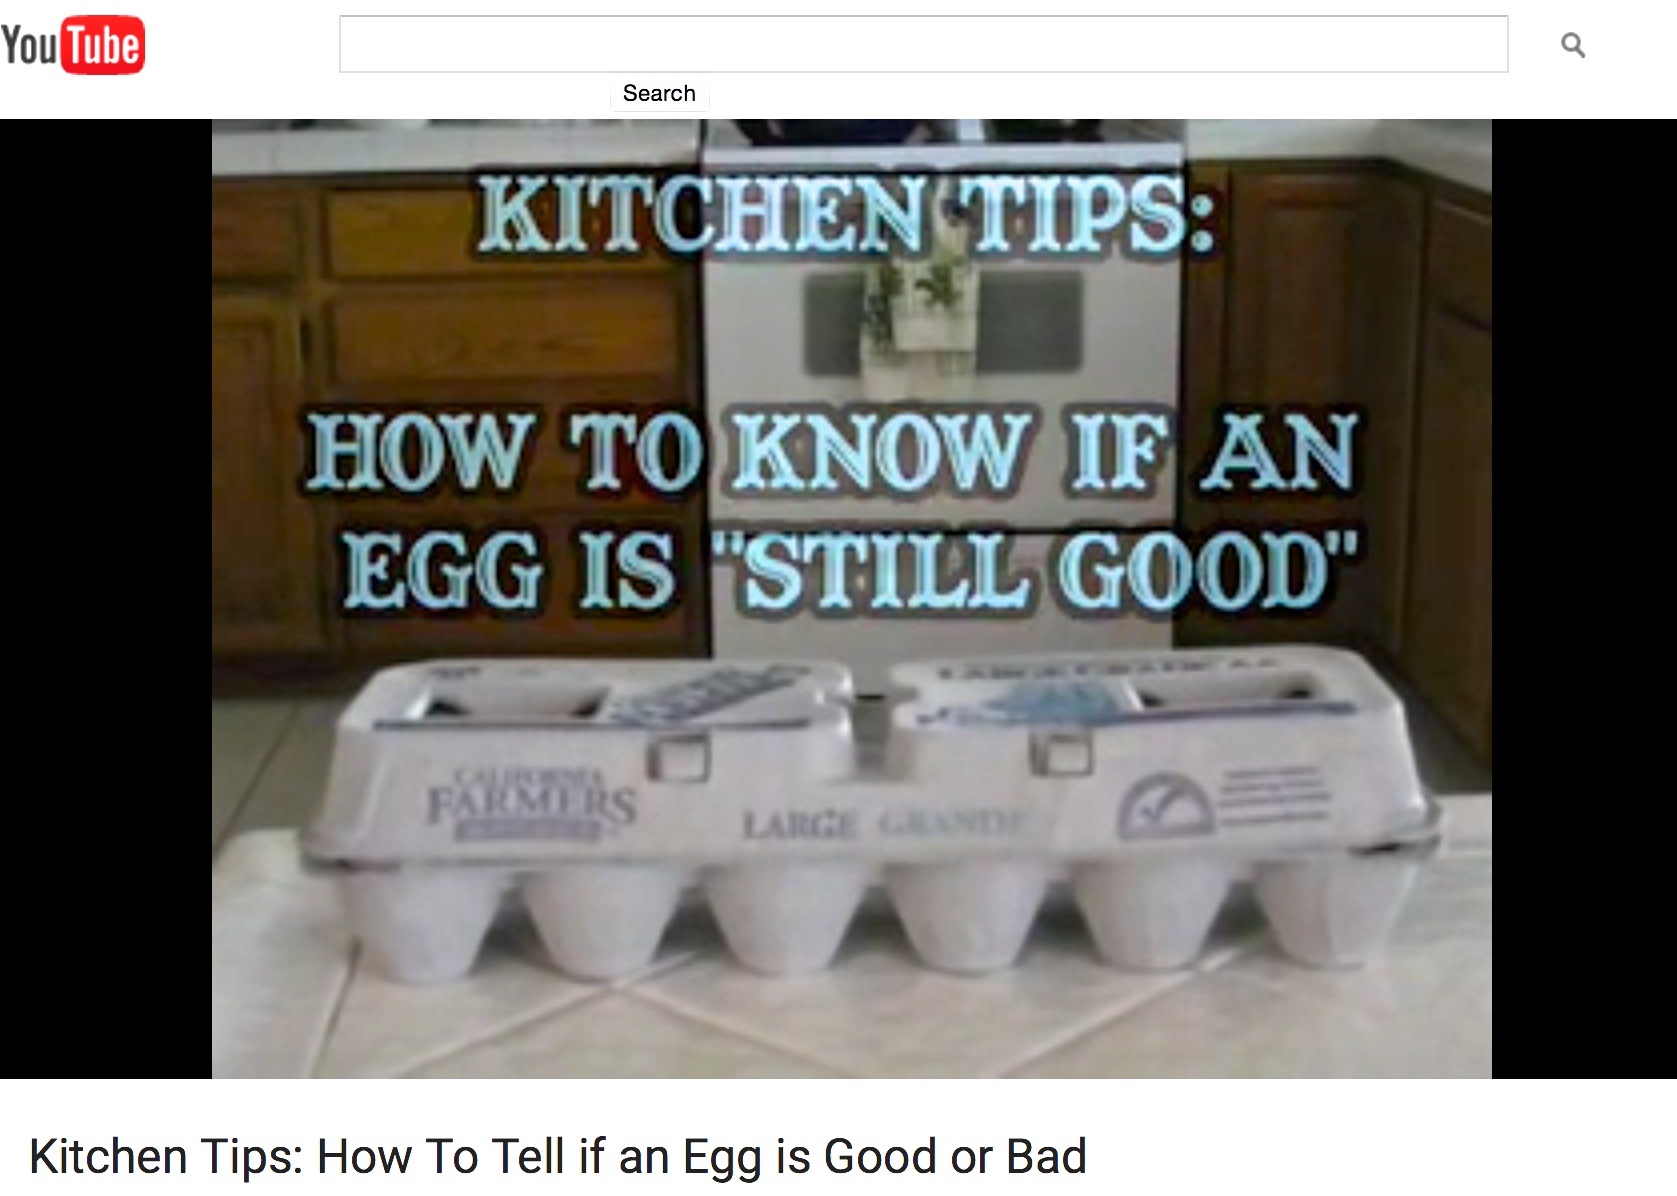 How to know if an egg is still good